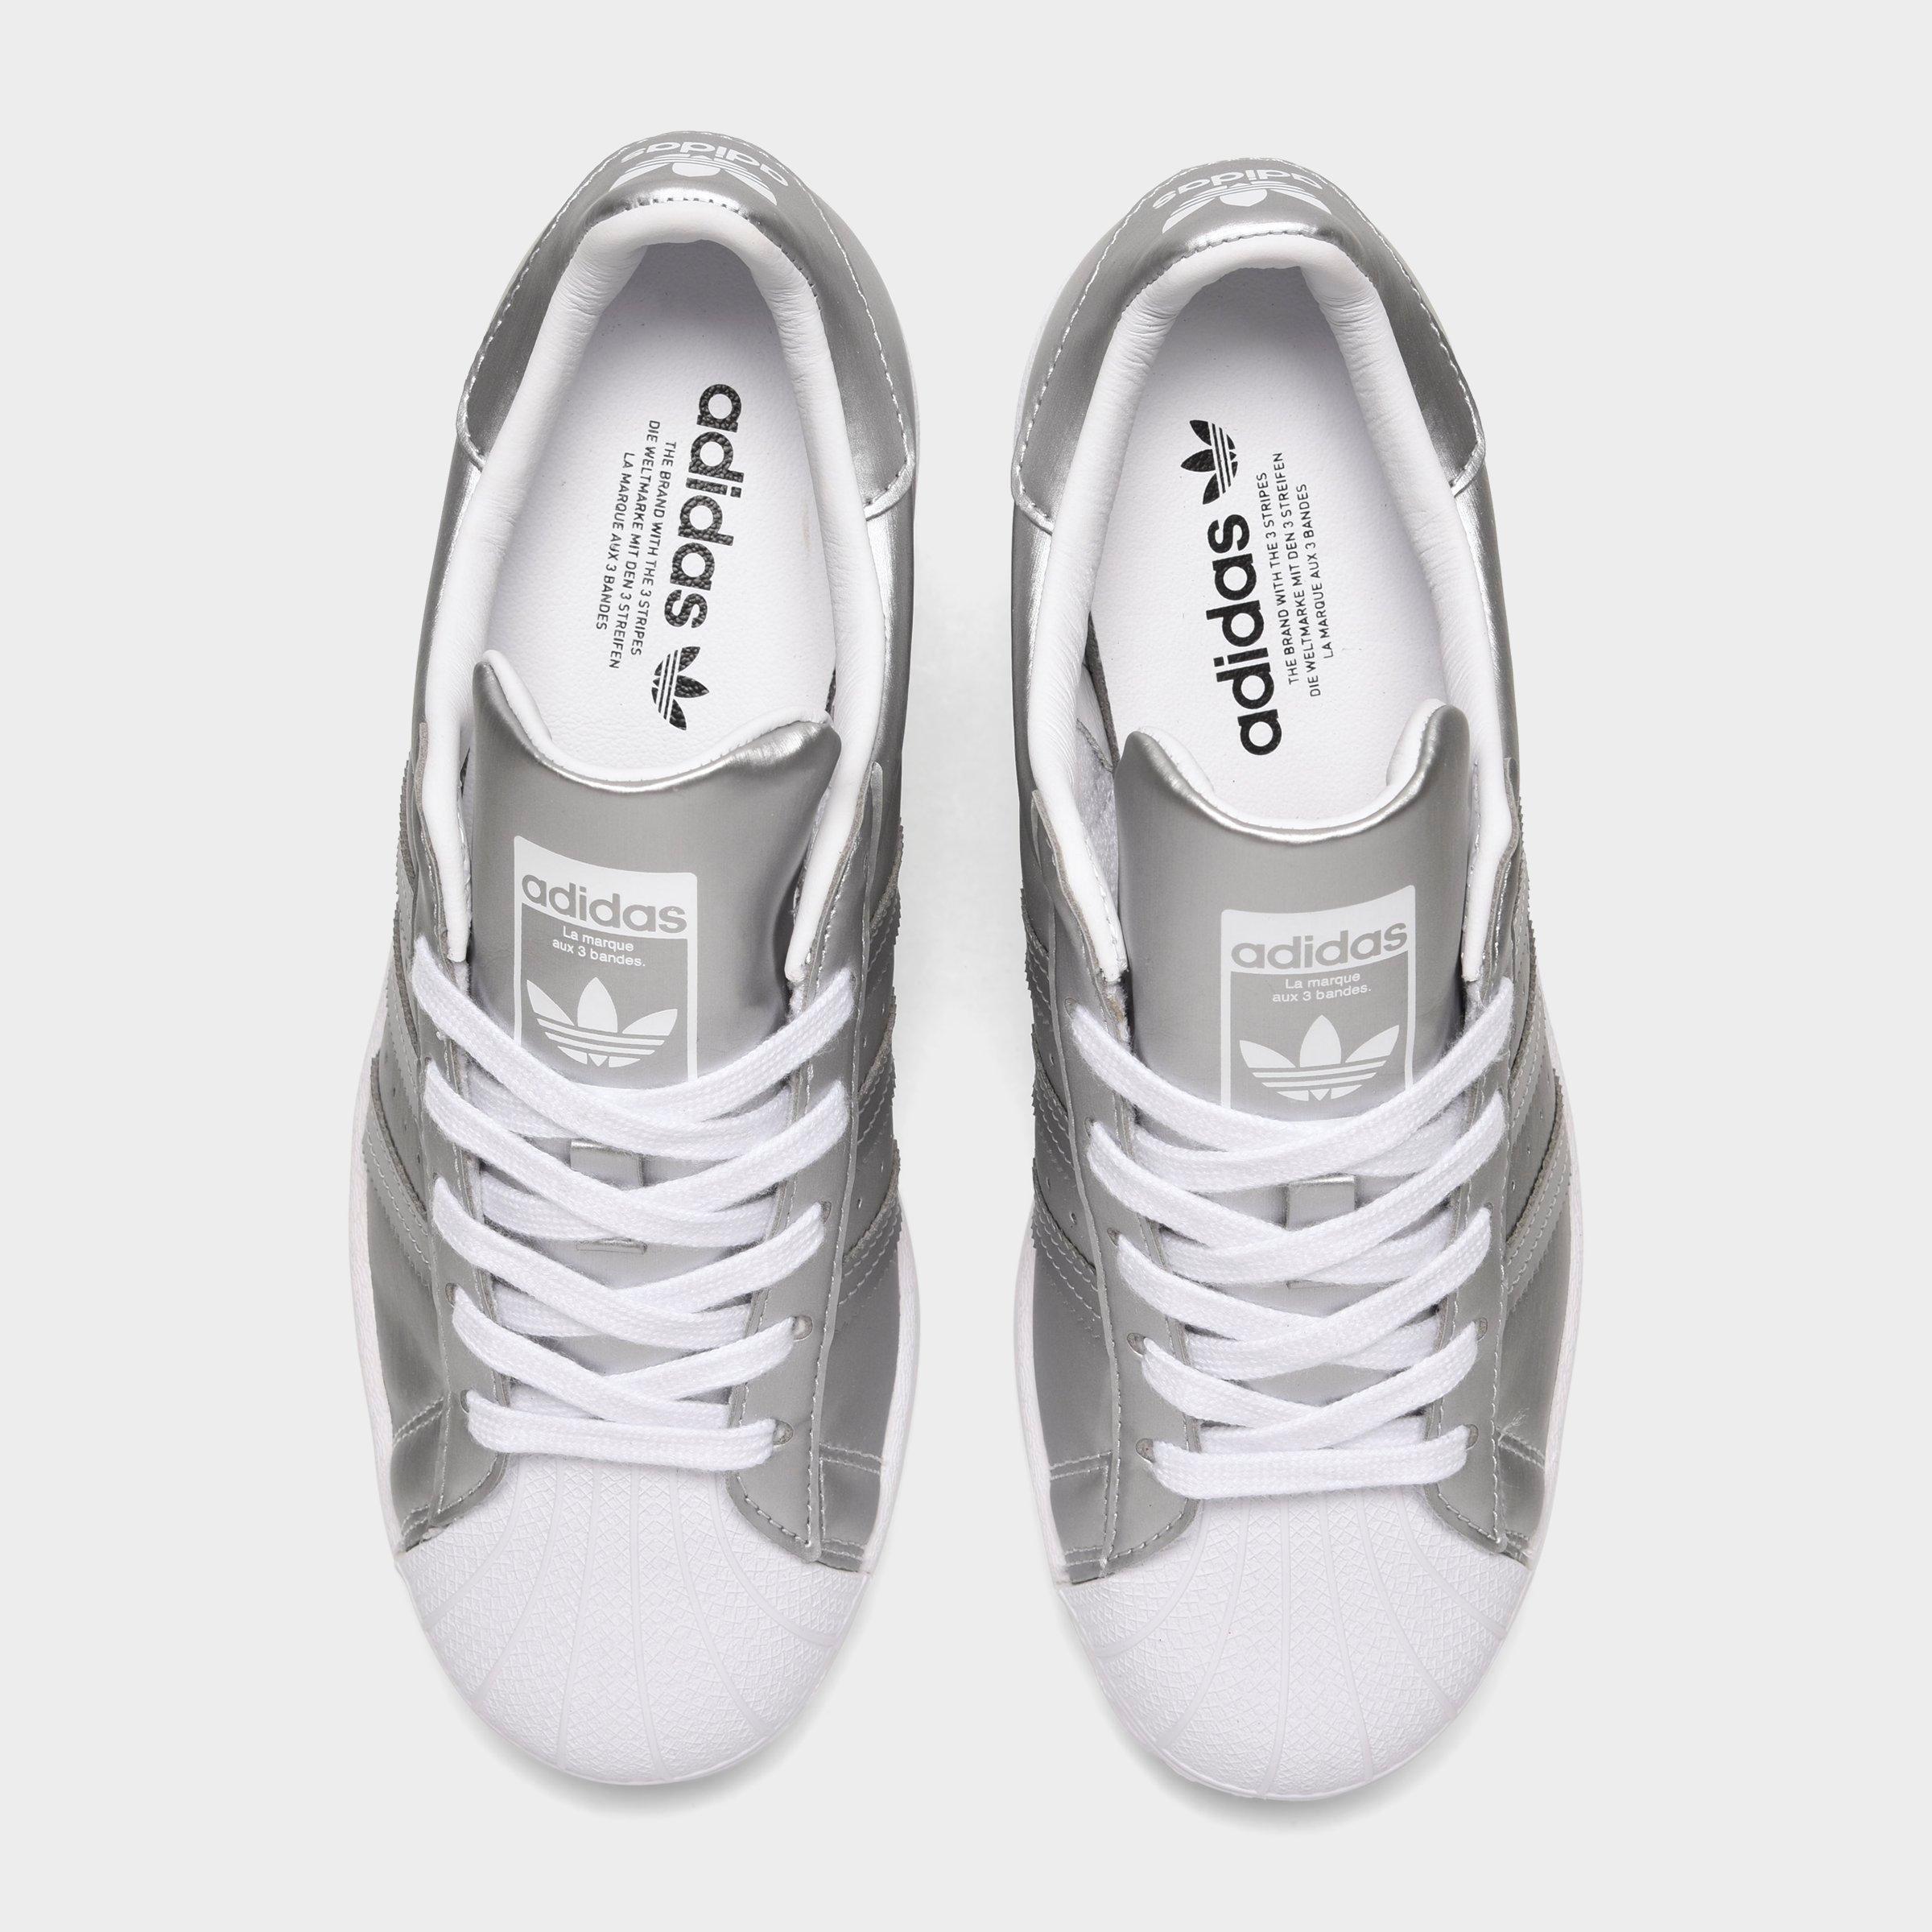 women's originals superstar casual sneakers from finish line